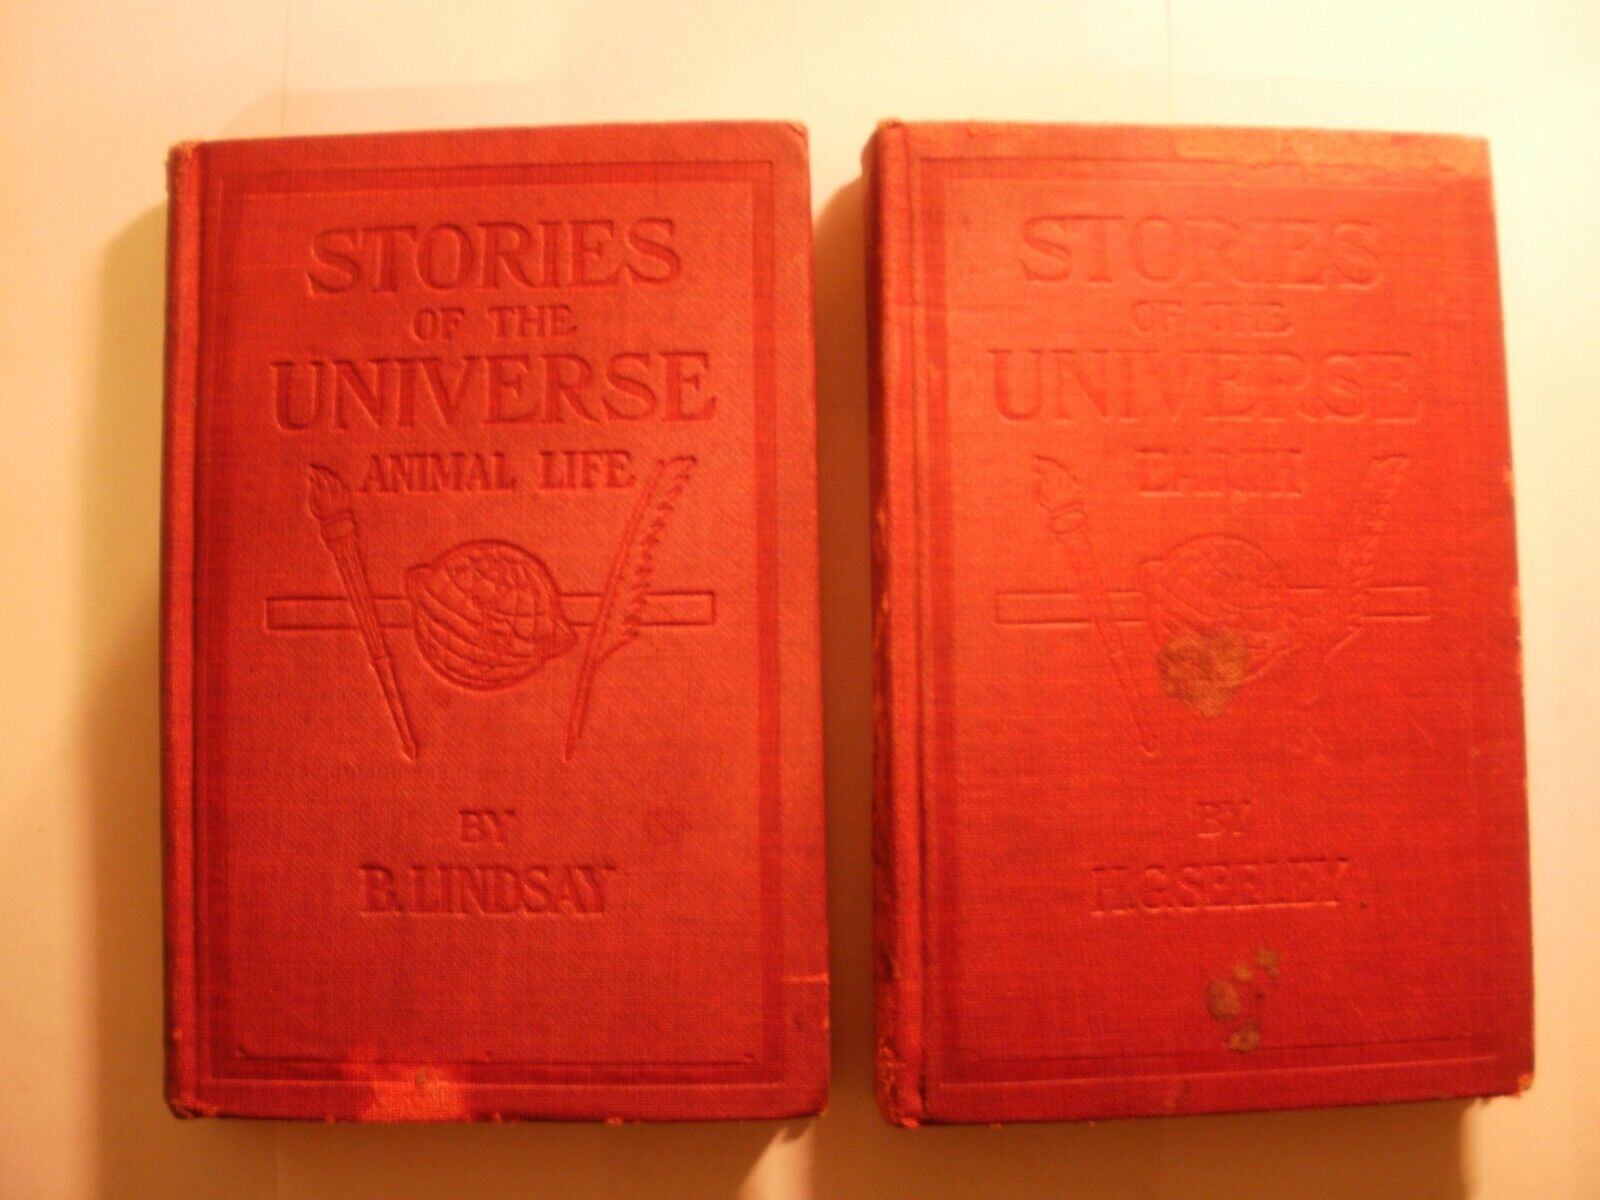 2 Vintage STORIES OF THE UNIVERSE Hardcover: EARTH Seeley + ANIMAL LIFE Lindsay